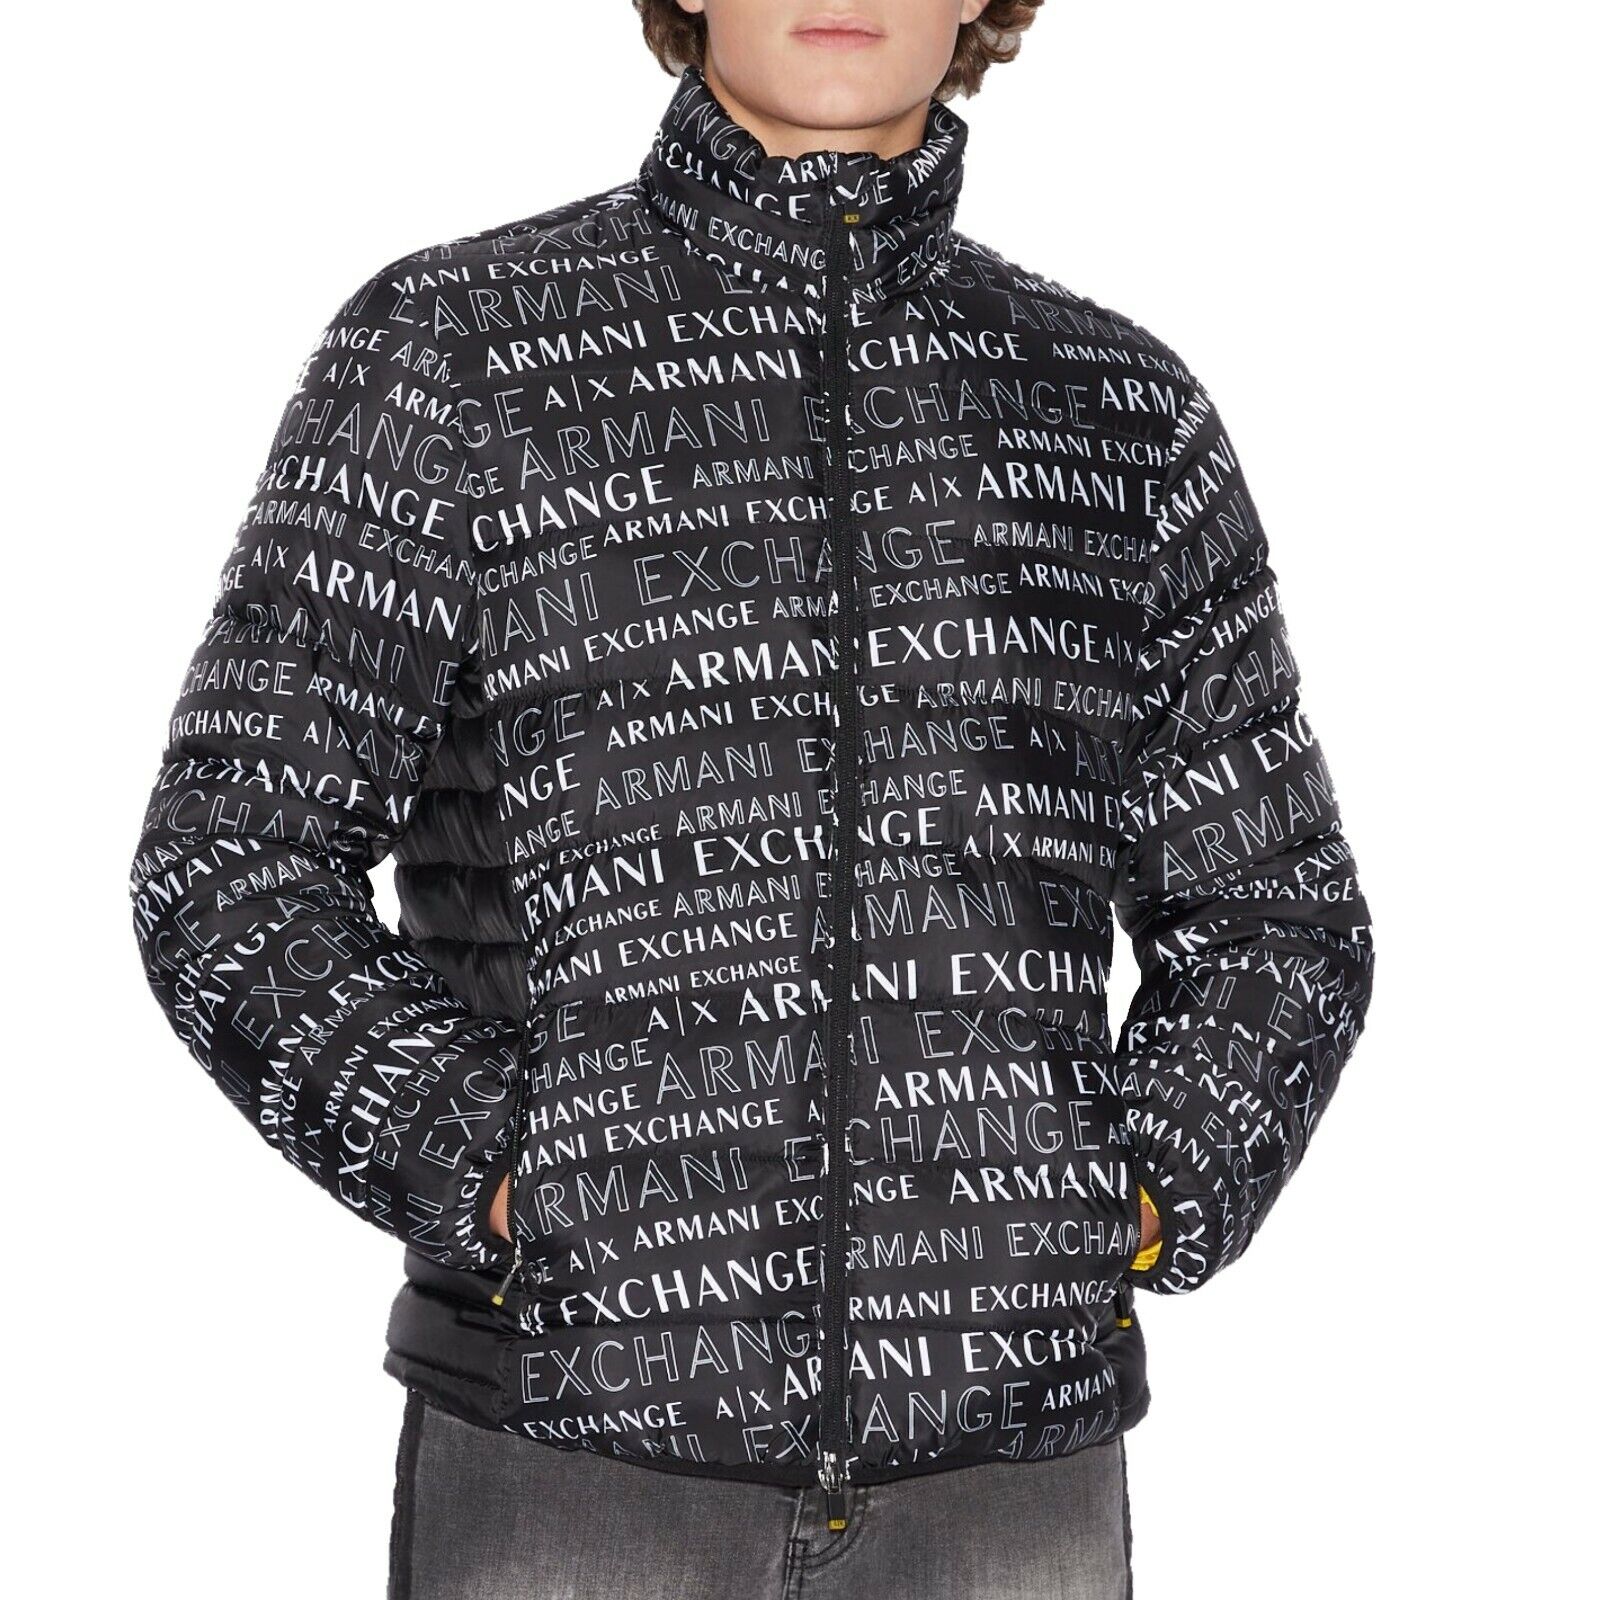 NWT : A|X ARMANI EXCHANGE Mens Logo Print Quilted Puffer Jacket : Black: S - XXL